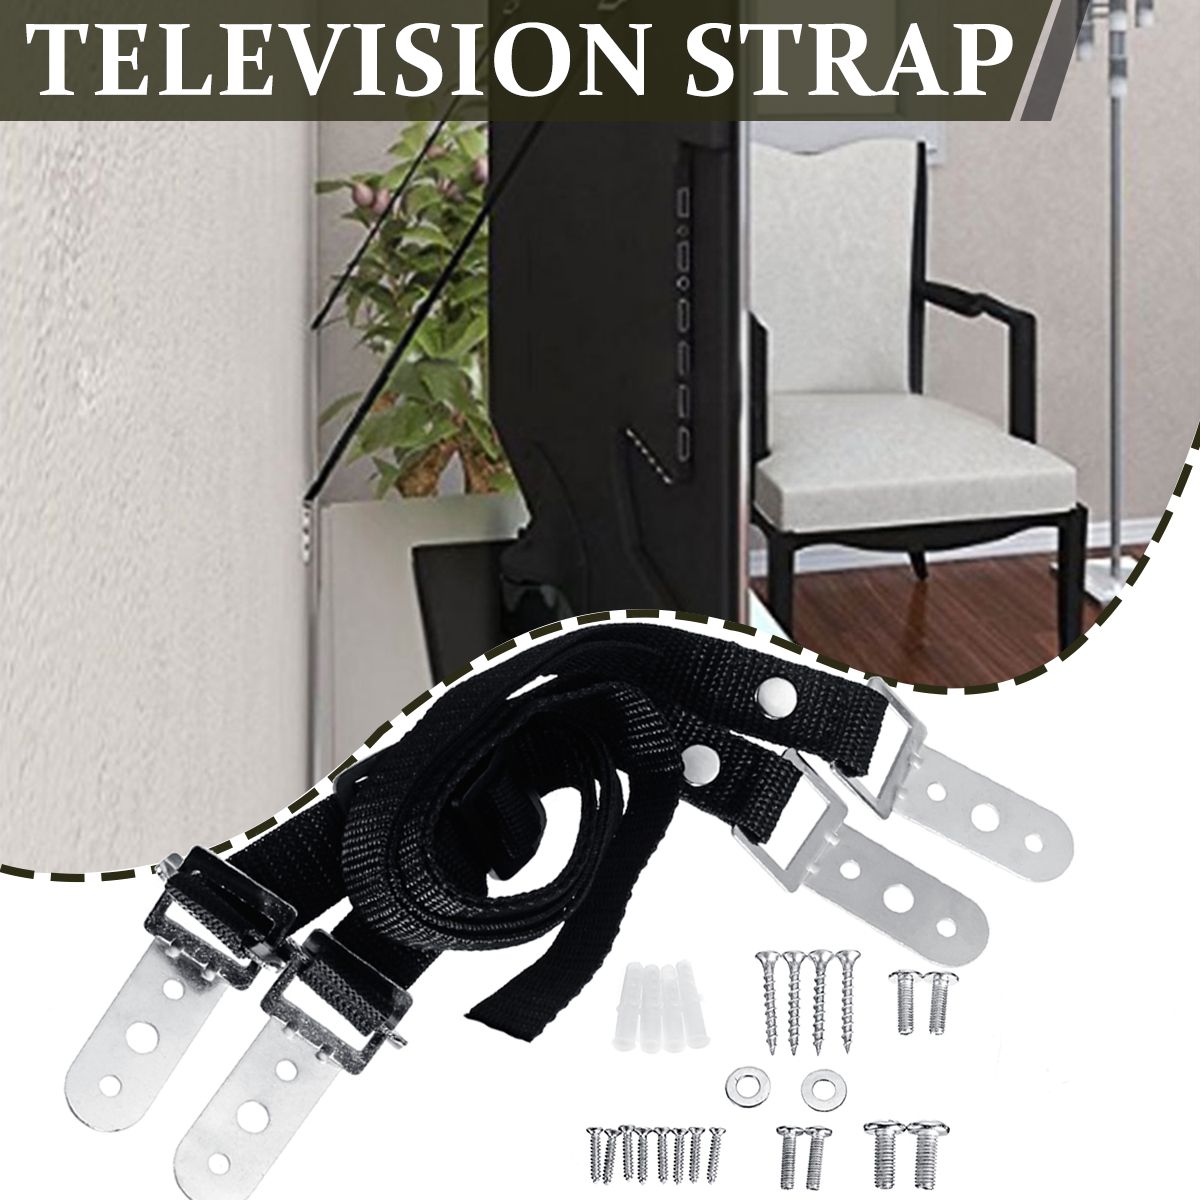 2pcs-TV-Safety-Strap-Anti-Tip-Set-Television-Support-Tools-1565310